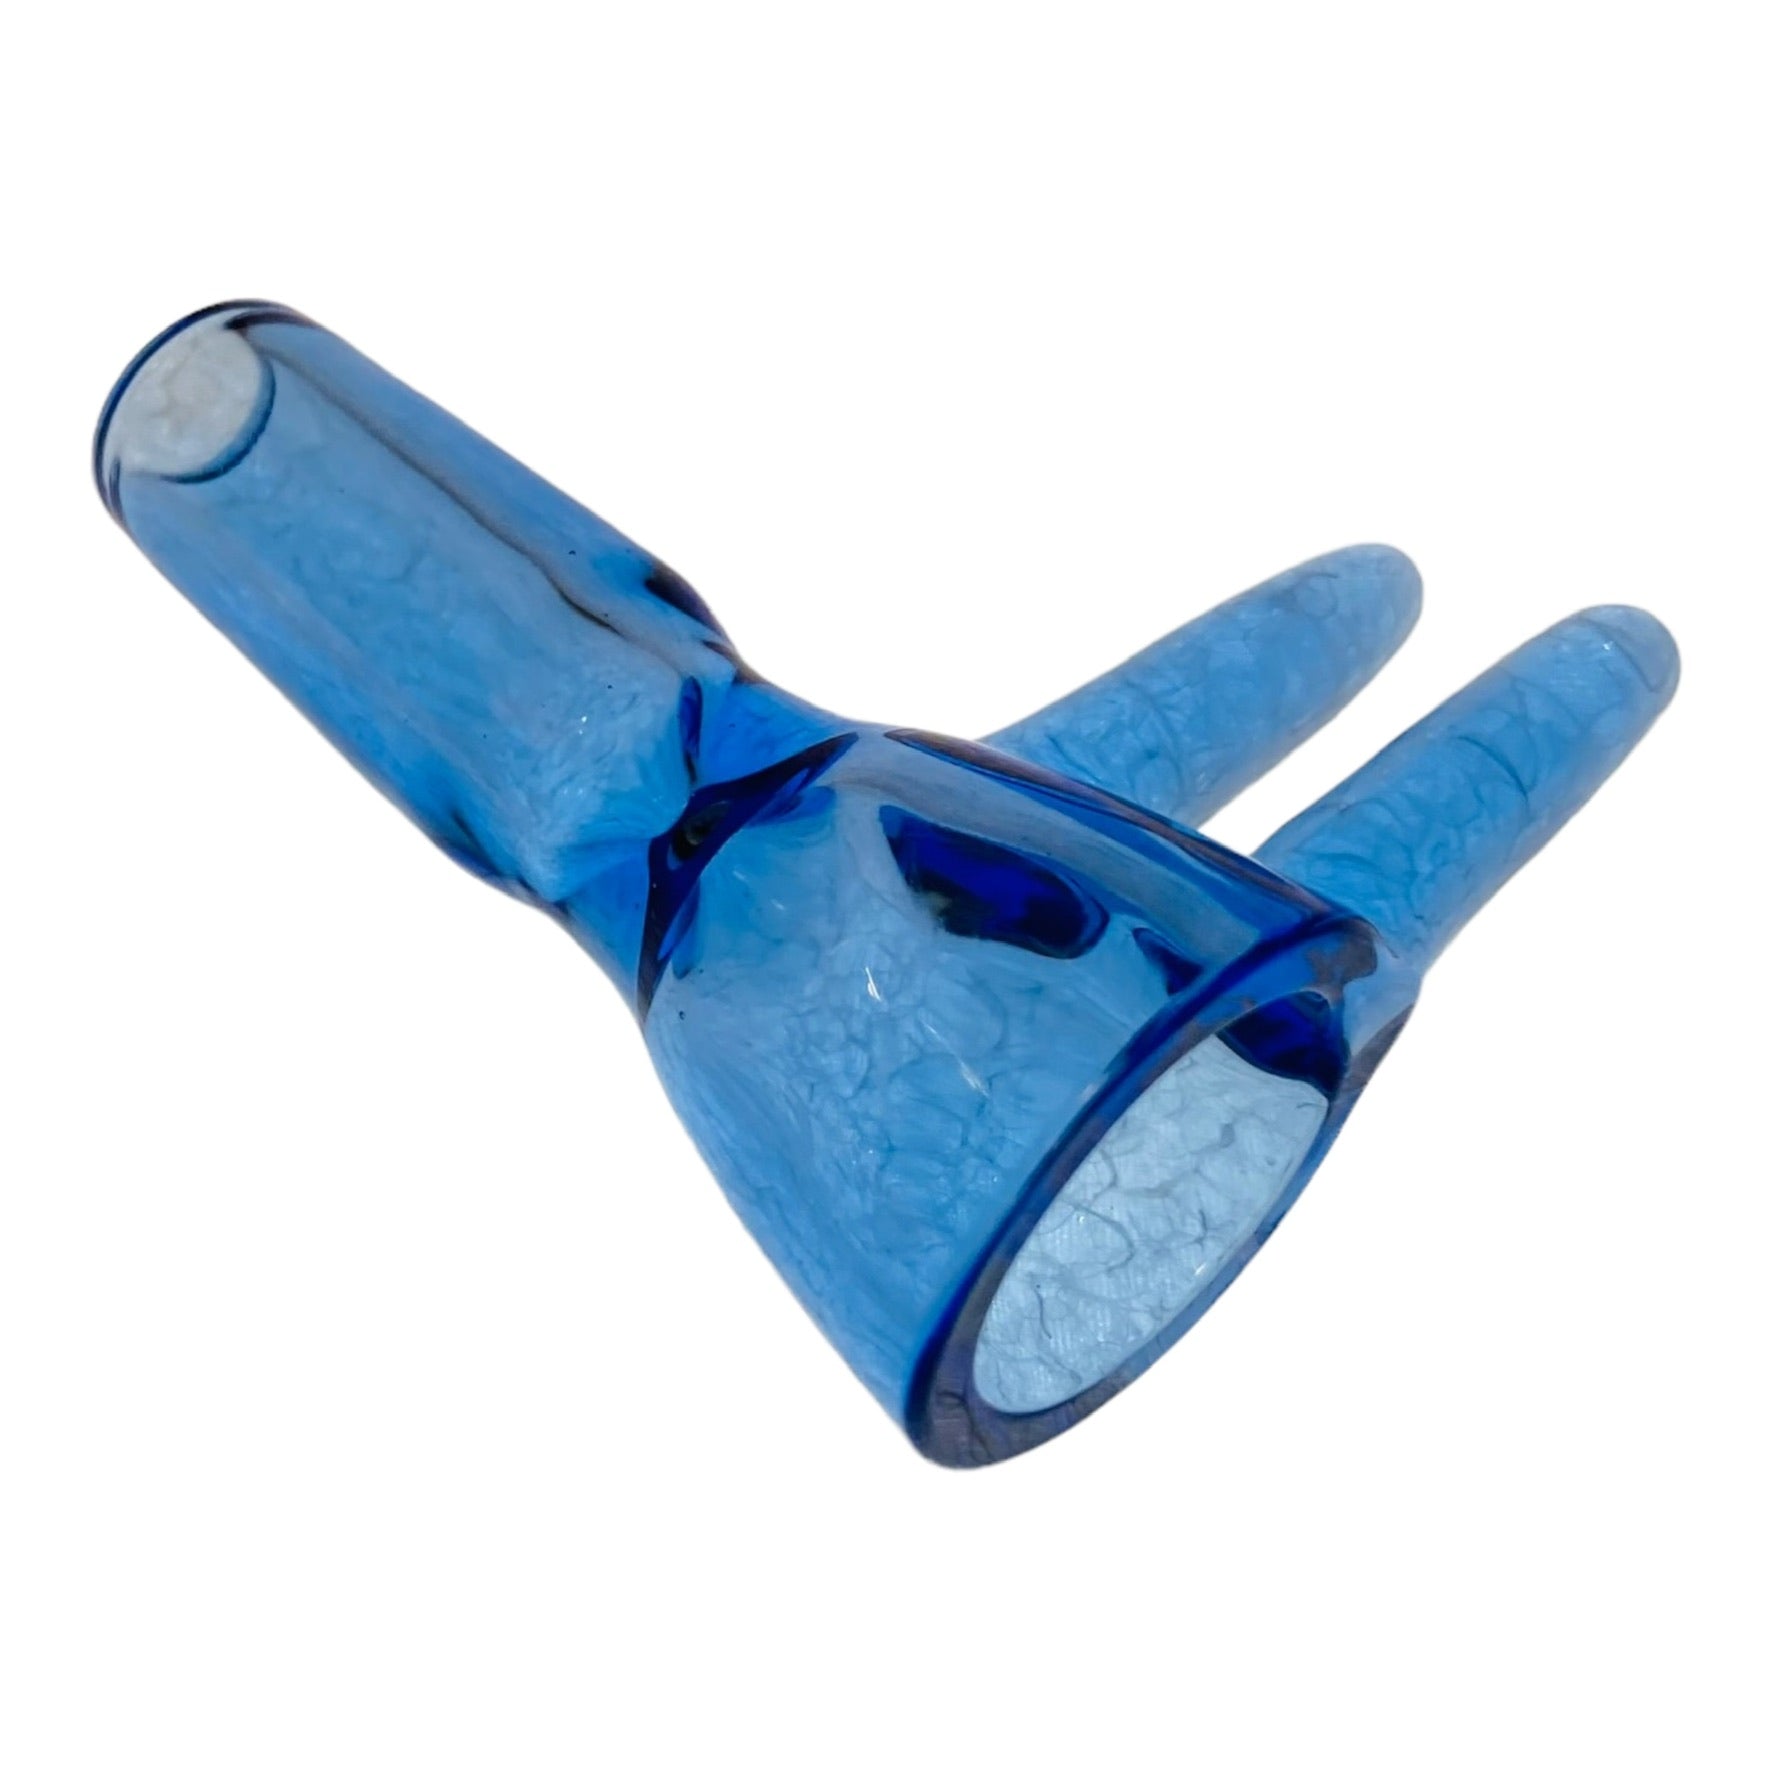 Optera Glass - Cobalt Blue With Blue Handle - 14mm Bowl Piece 